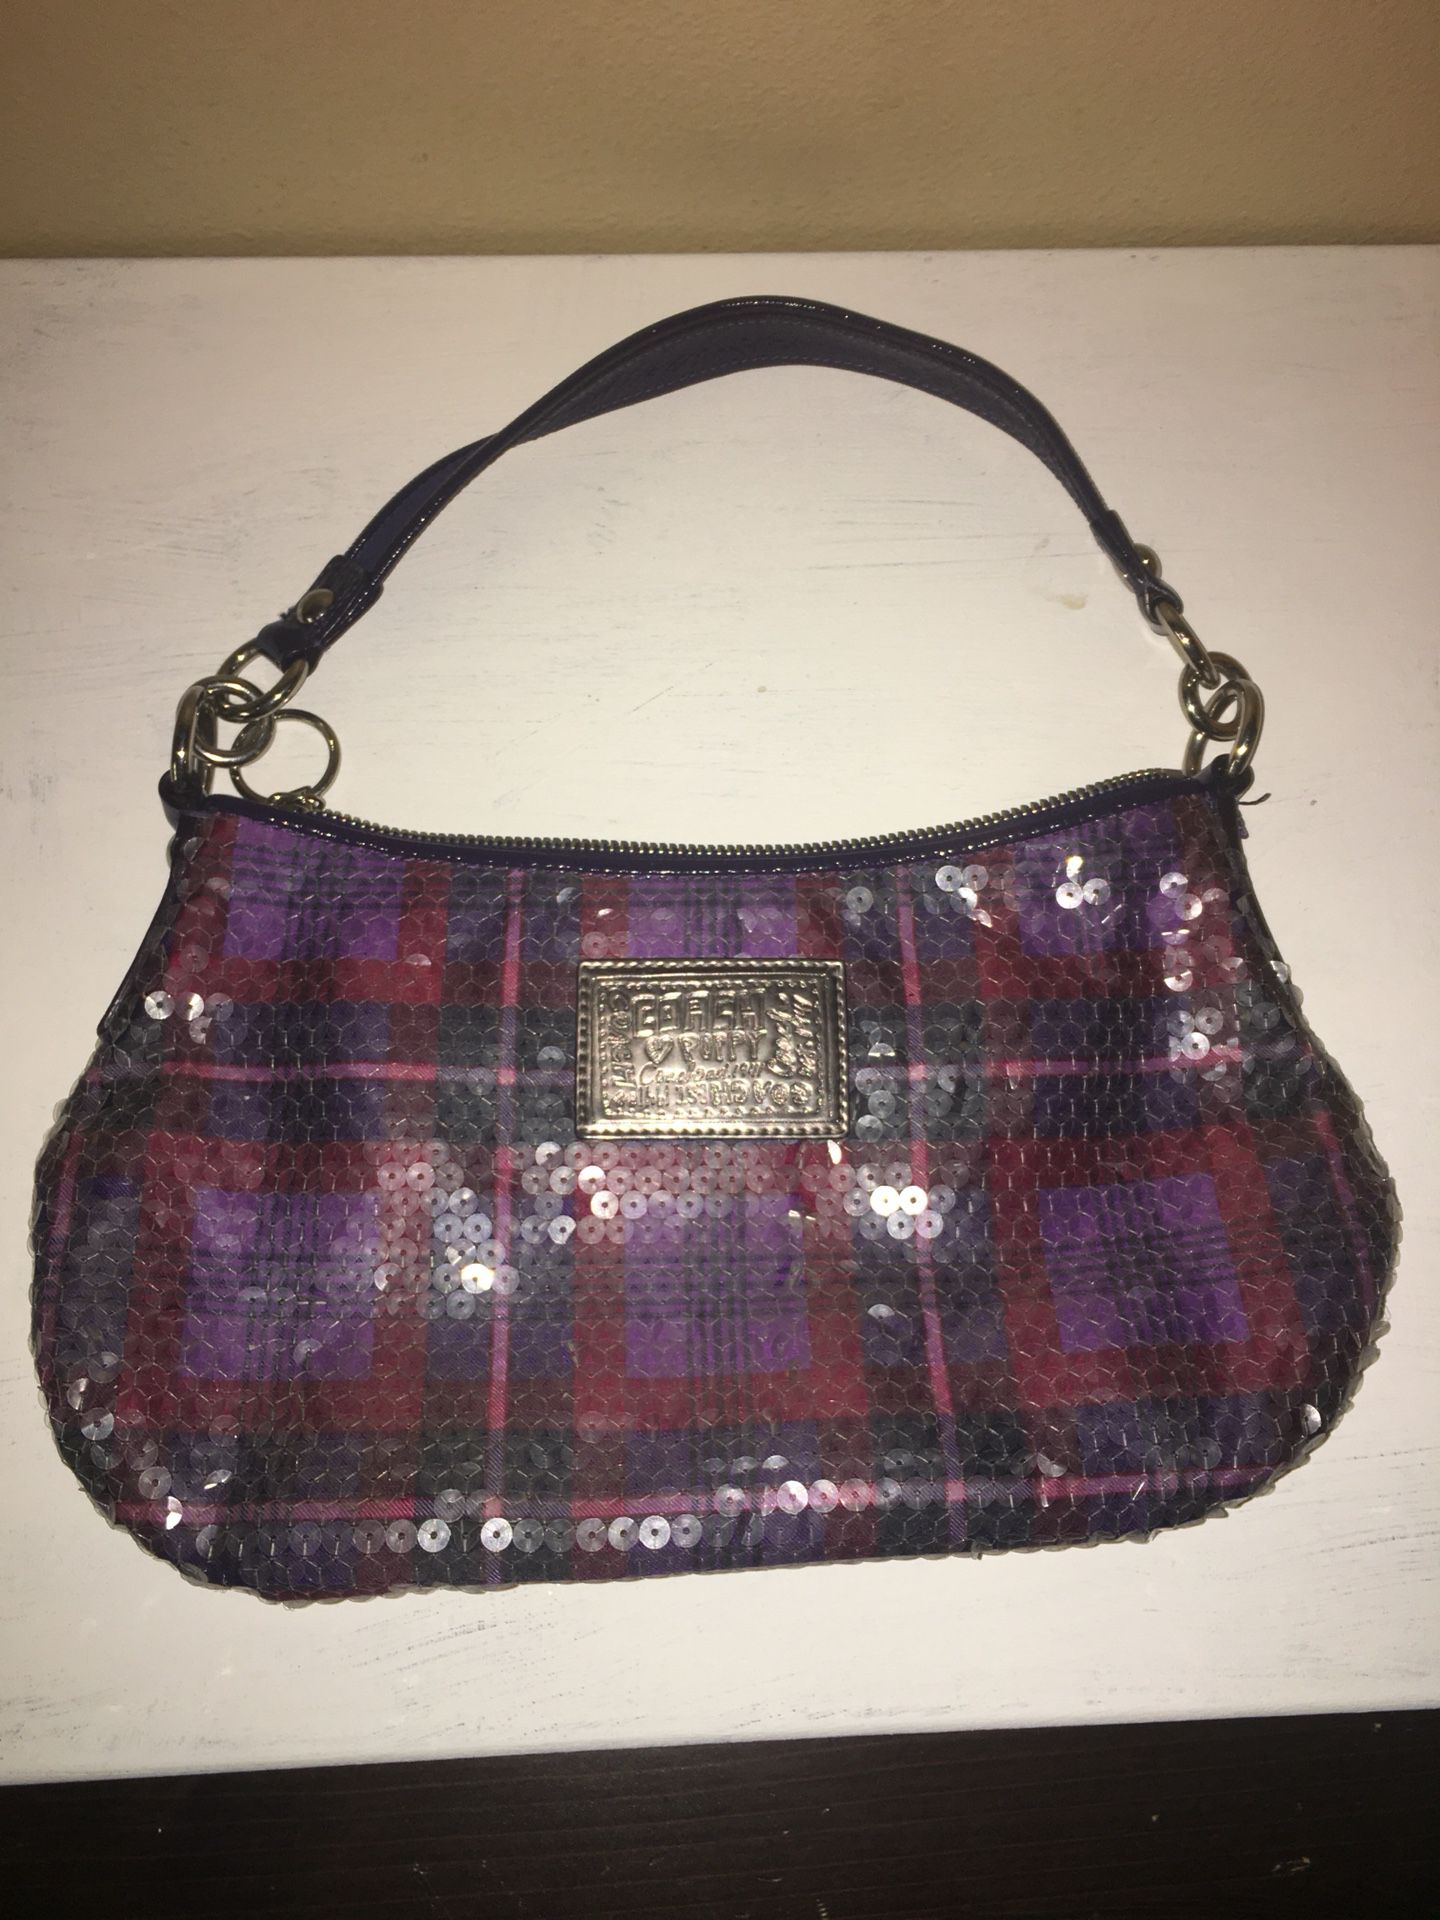 Coach and Tommy Hilfiger purses